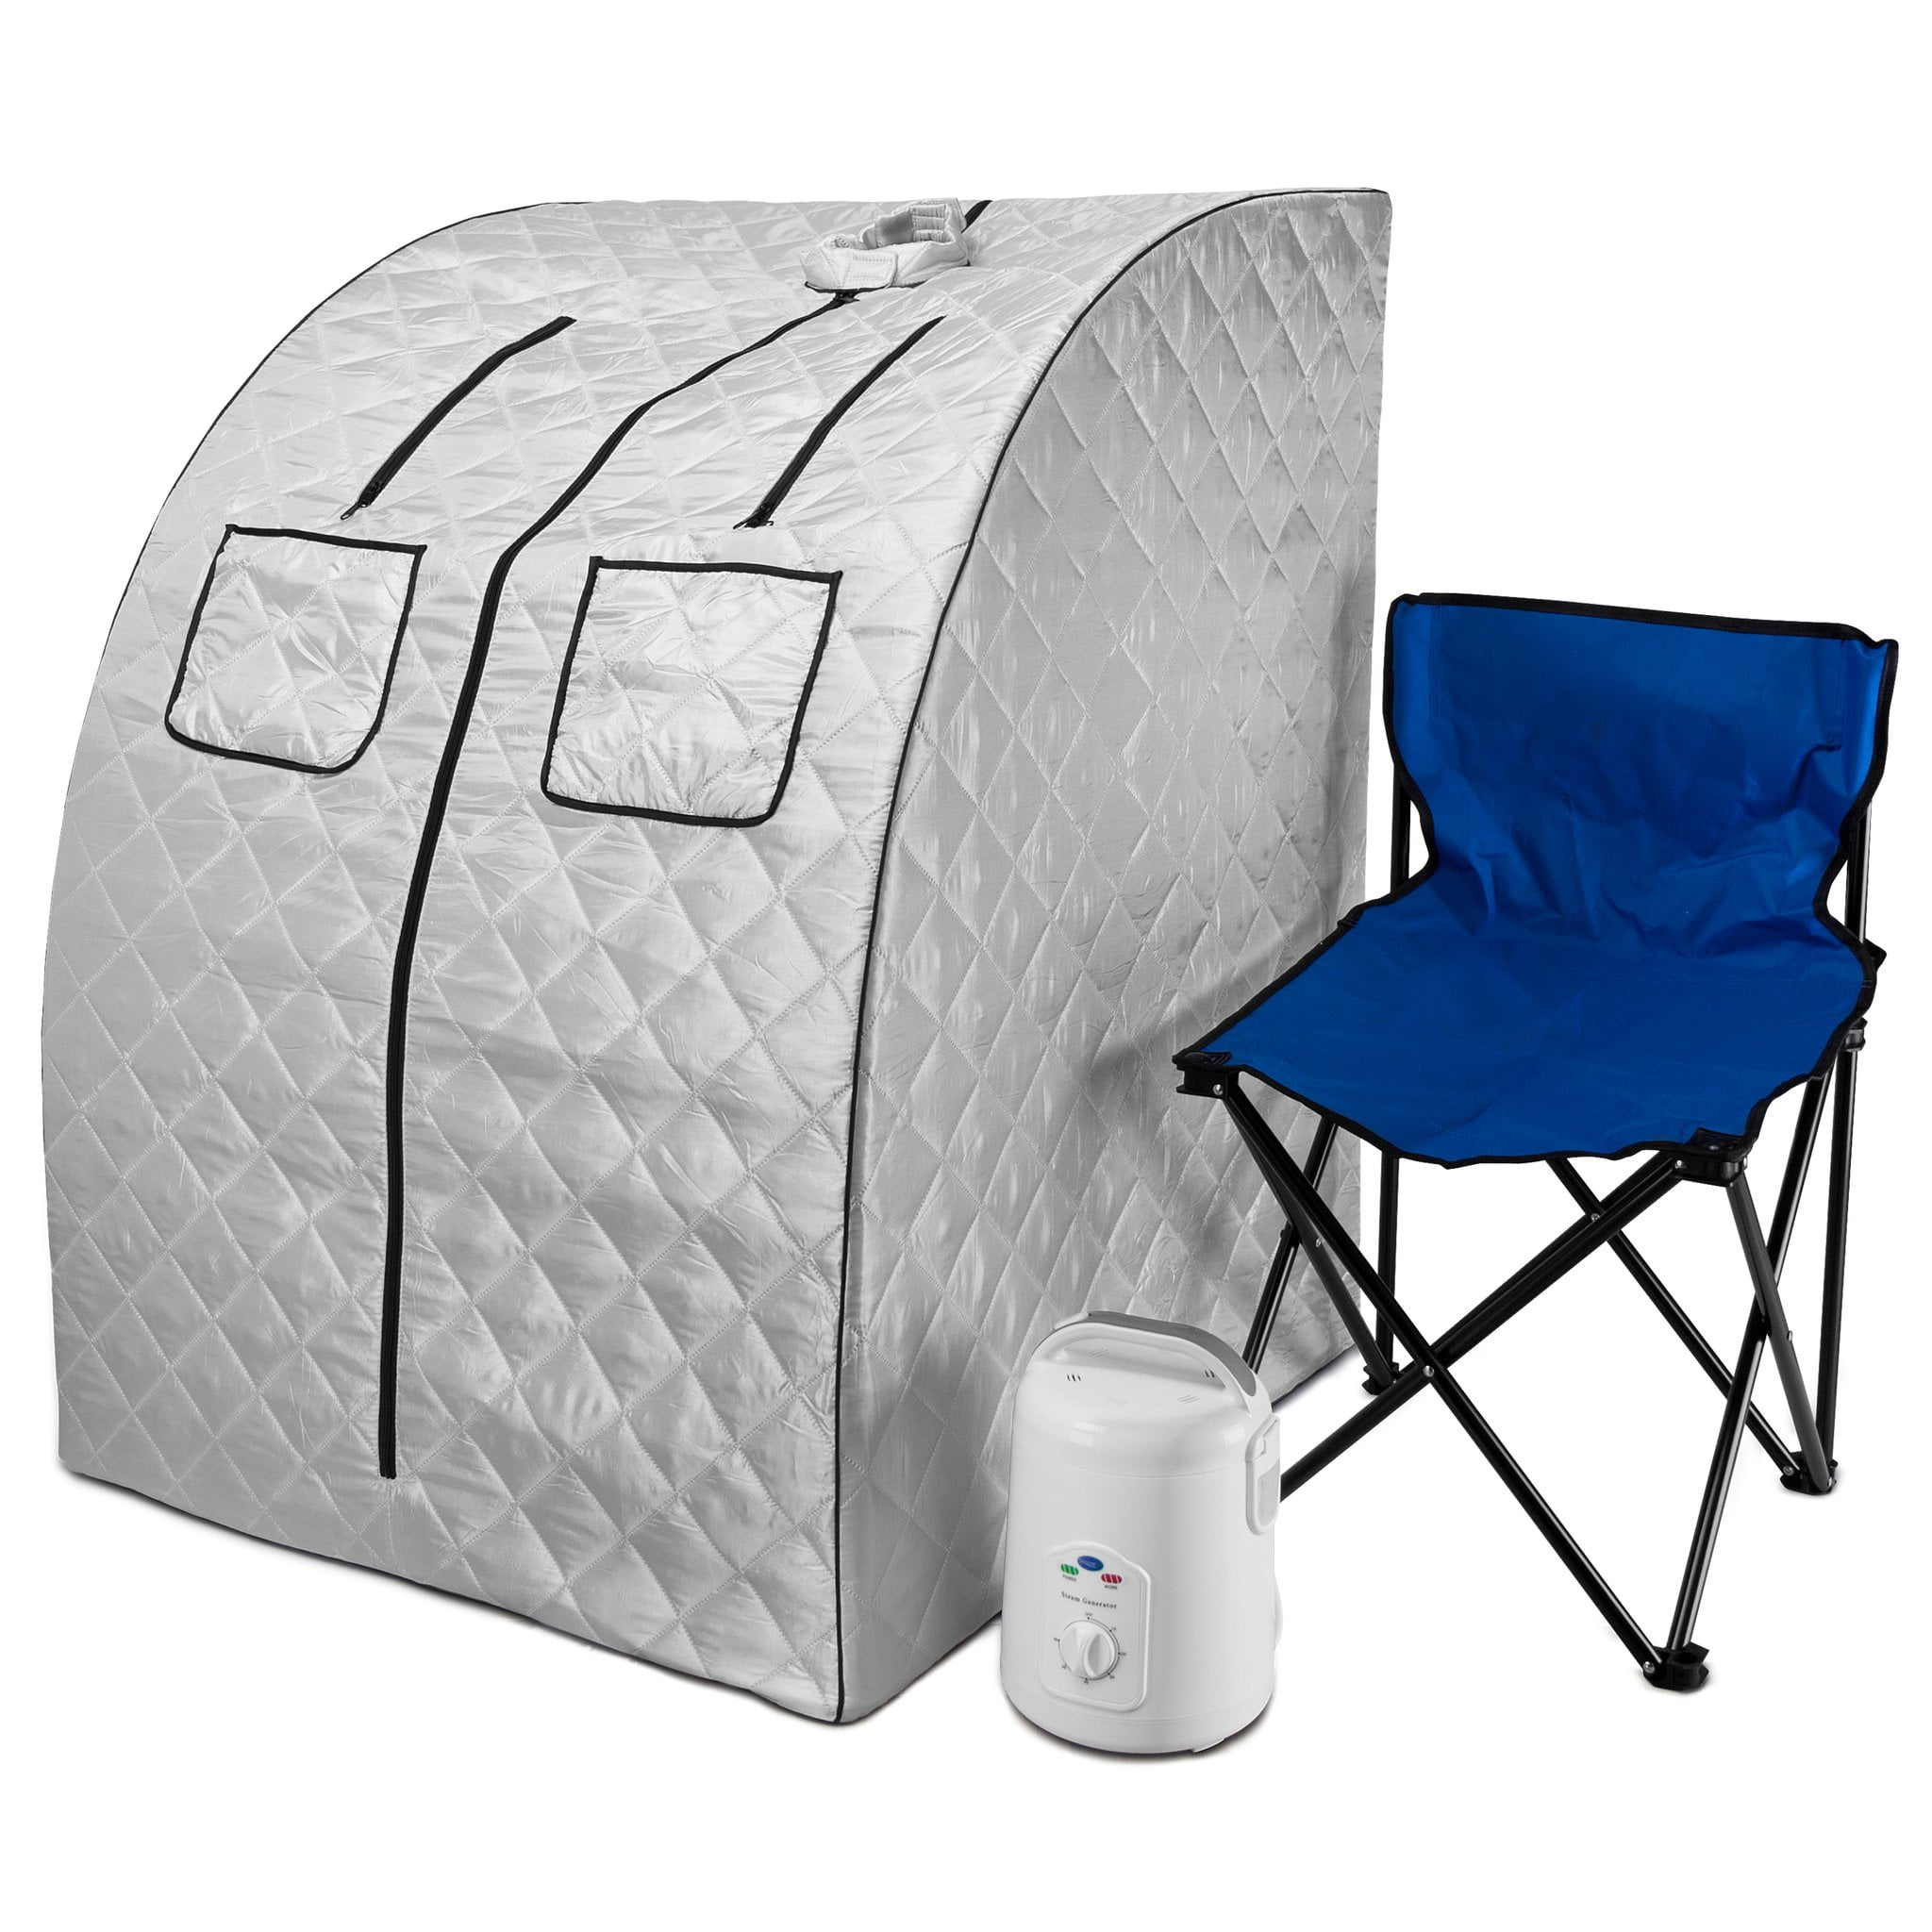 800 Watt Steam Generator Chair Included Light Blue Durasage Lightweight Portable Personal Steam Sauna Spa for Weight Loss Detox 60 Minute Timer Relaxation at Home 